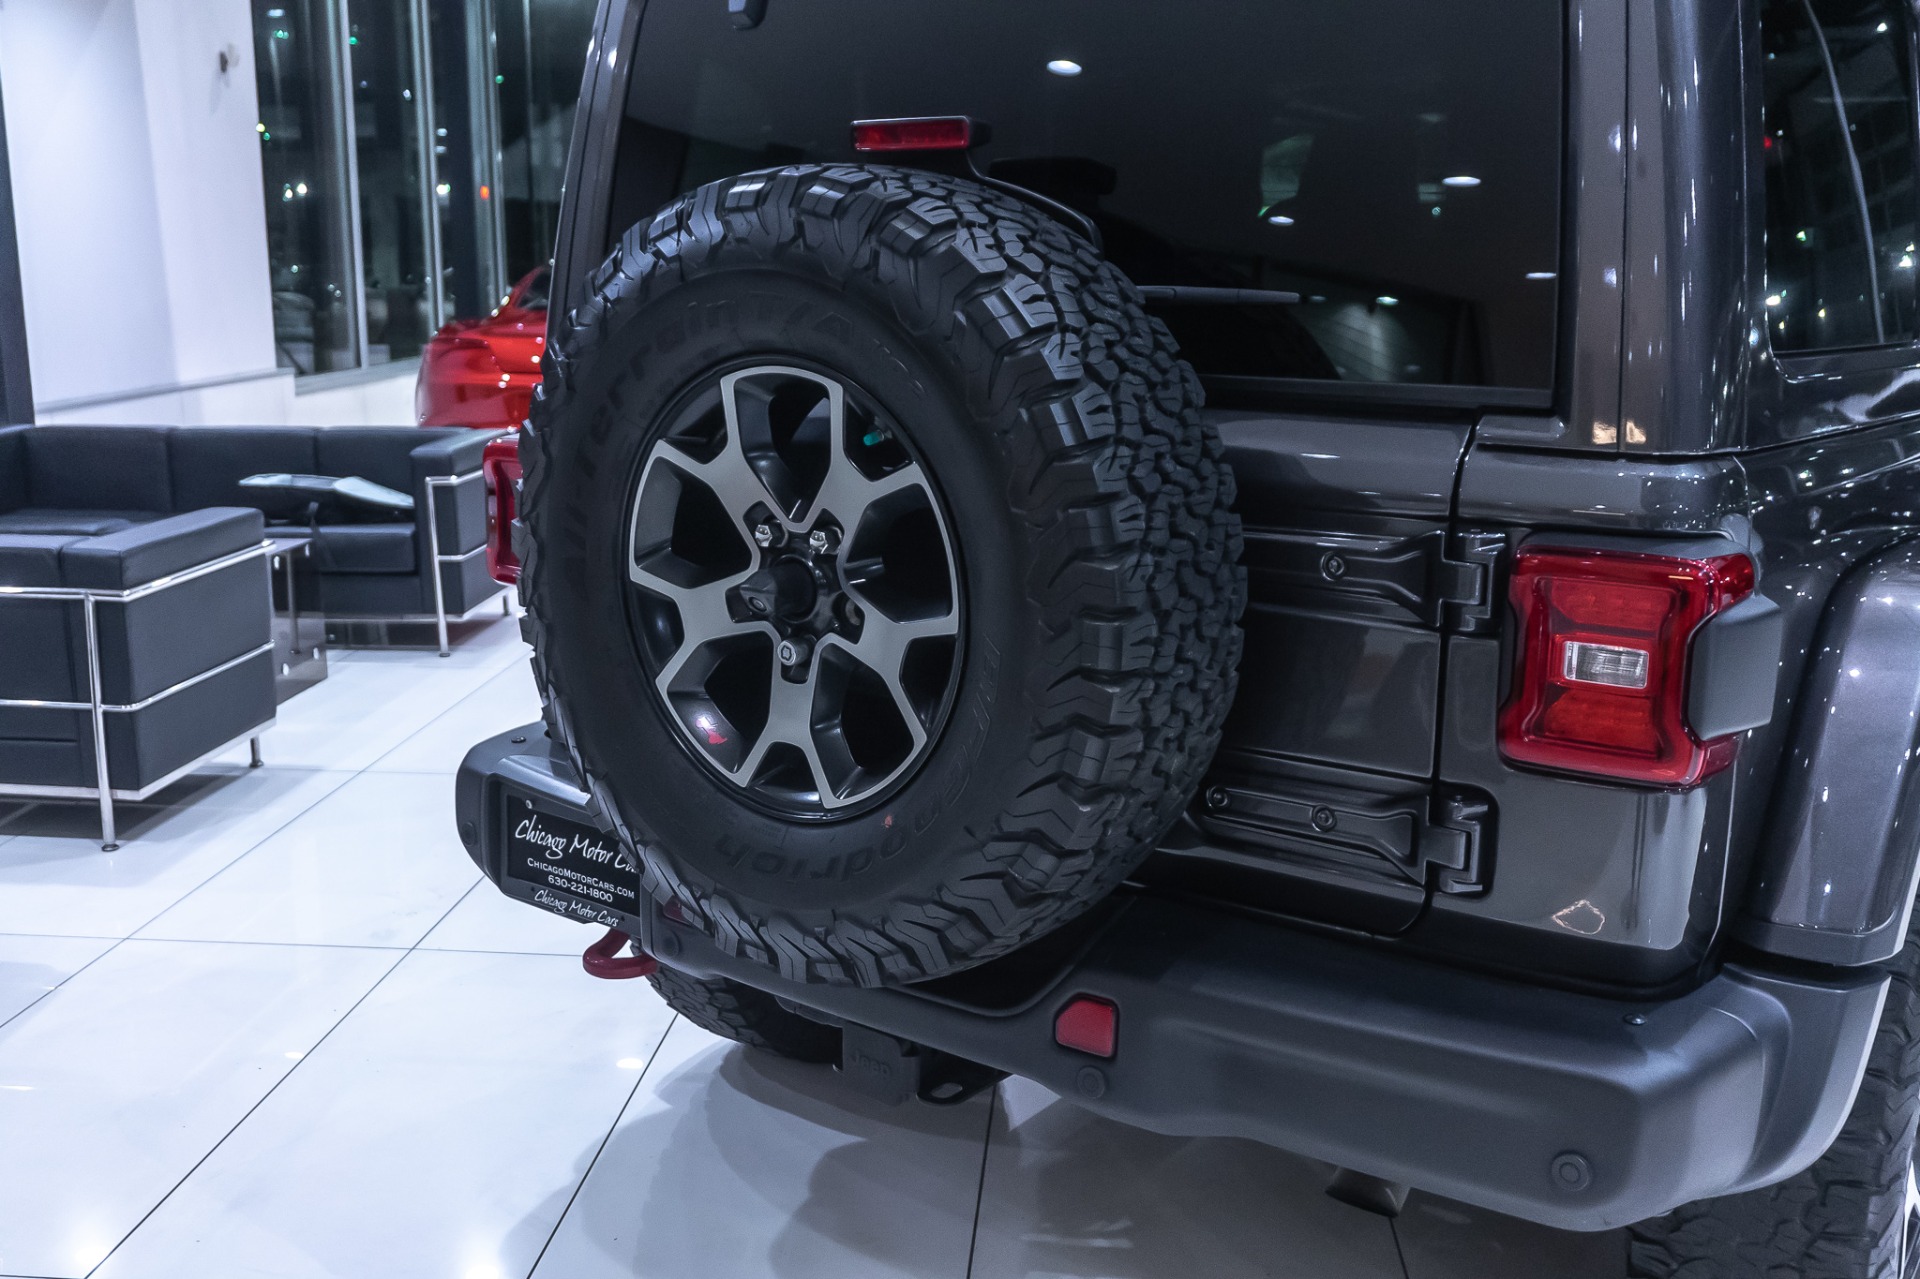 Used-2018-Jeep-Wrangler-Unlimited-Rubicon-V6-4X4-LED-Lighting-Package-Body-Color-Hard-Top-New-Tires